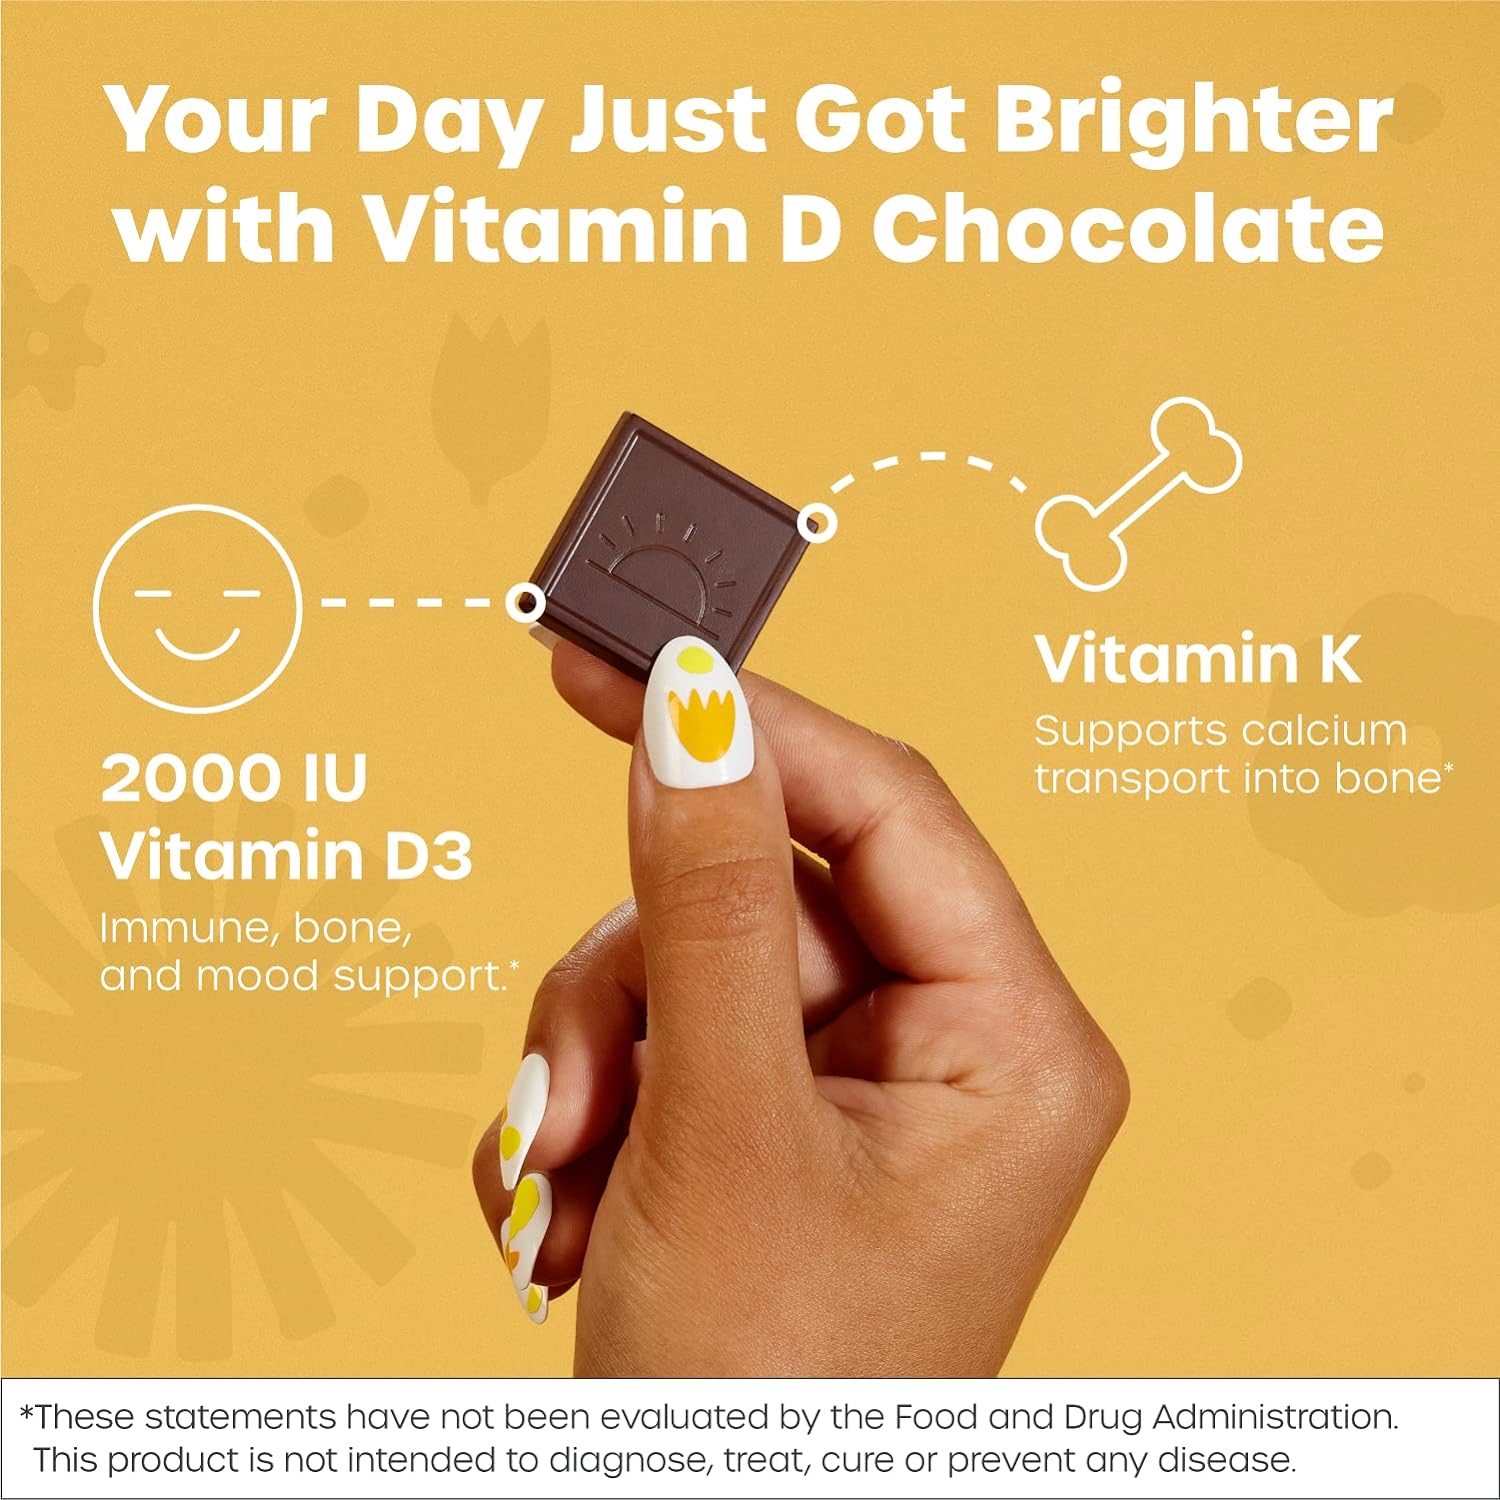 FX CHOCOLATE Rested and Radiant Set - Dream + Sunshine Chocolate Supplements - Melatonin and Vitamin D Chocolates - Delicious, Non-GMO and Sugar Free (2 Boxes of 15/30 Count Total)